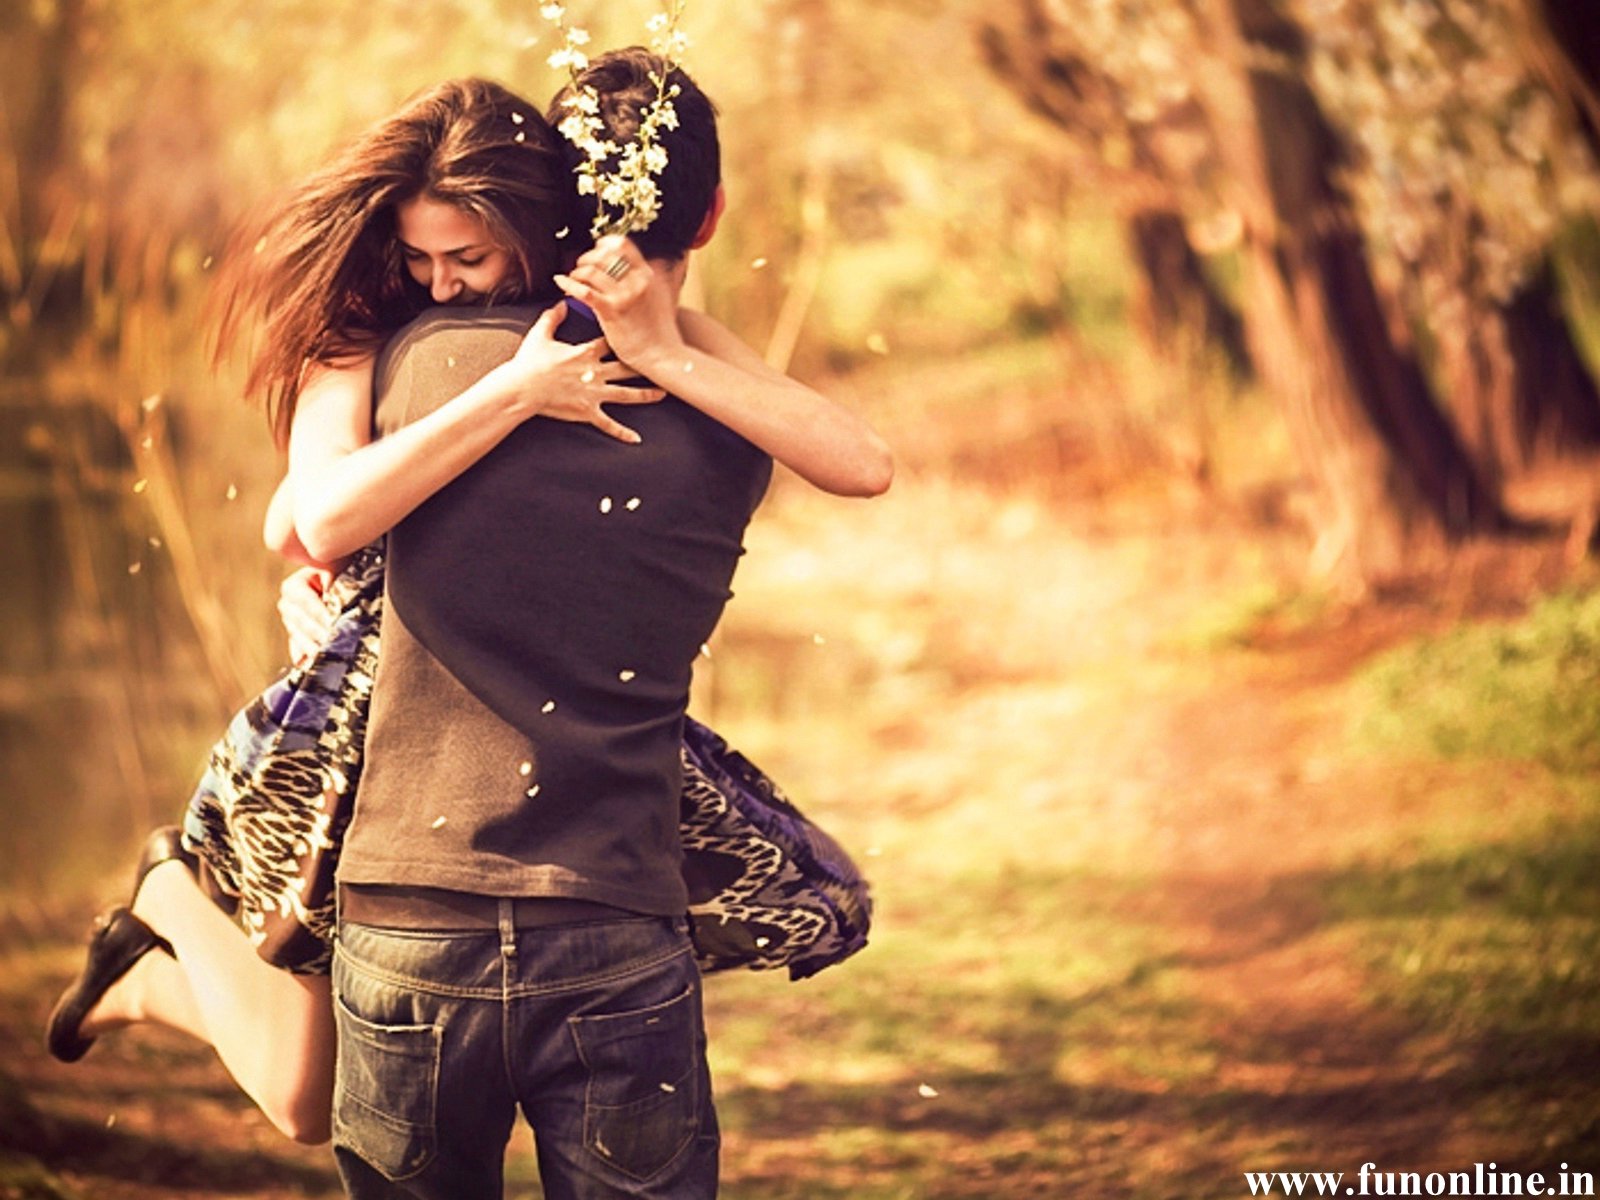 Cute Love Hug Wallpapers HD Wallpaper, Background Images